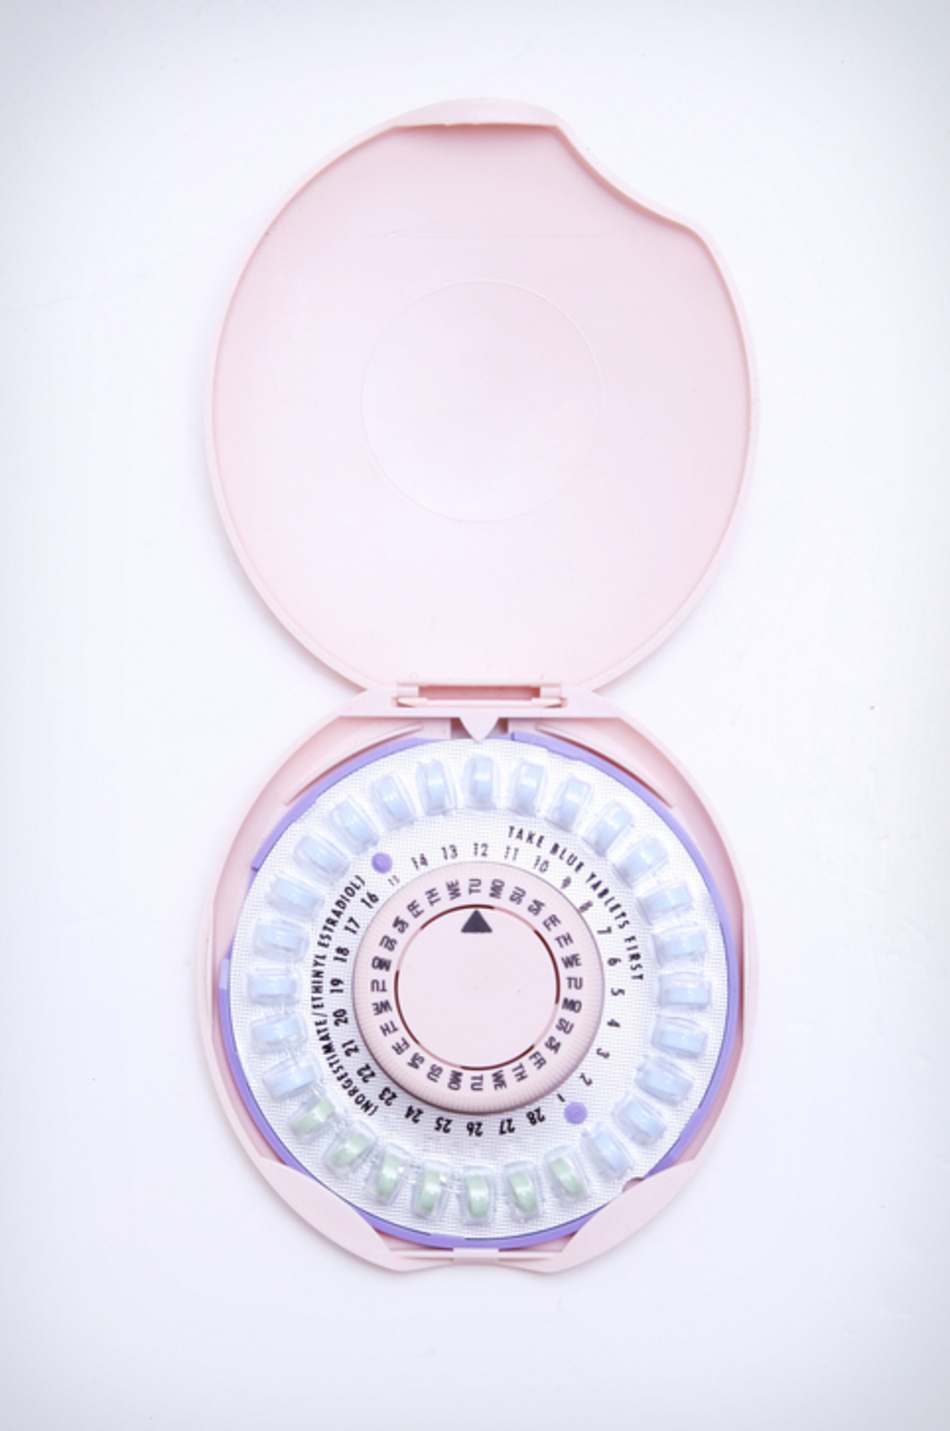 What You Need to Know About Buying Birth Control Online